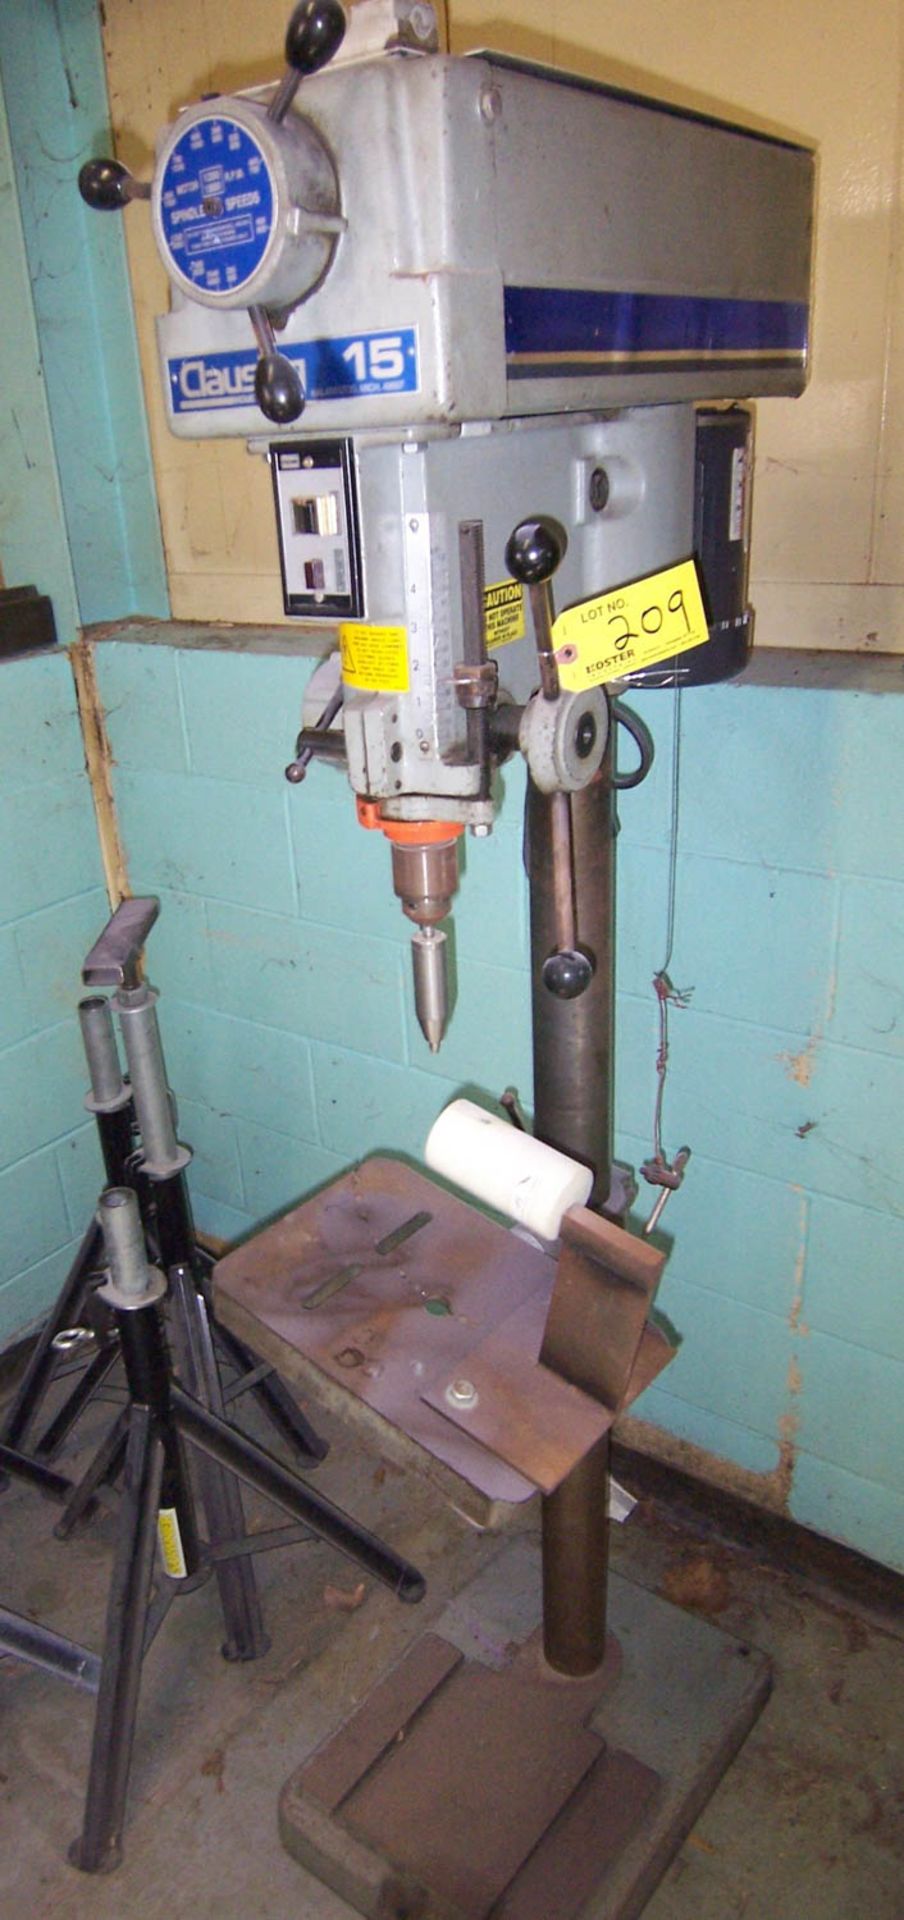 CLAUSING 15" FLOOR TYPE DRILL PRESS [LOCATED AT 130 SALT POINT TURNPIKE, POUGHKEEPSIE, NY]